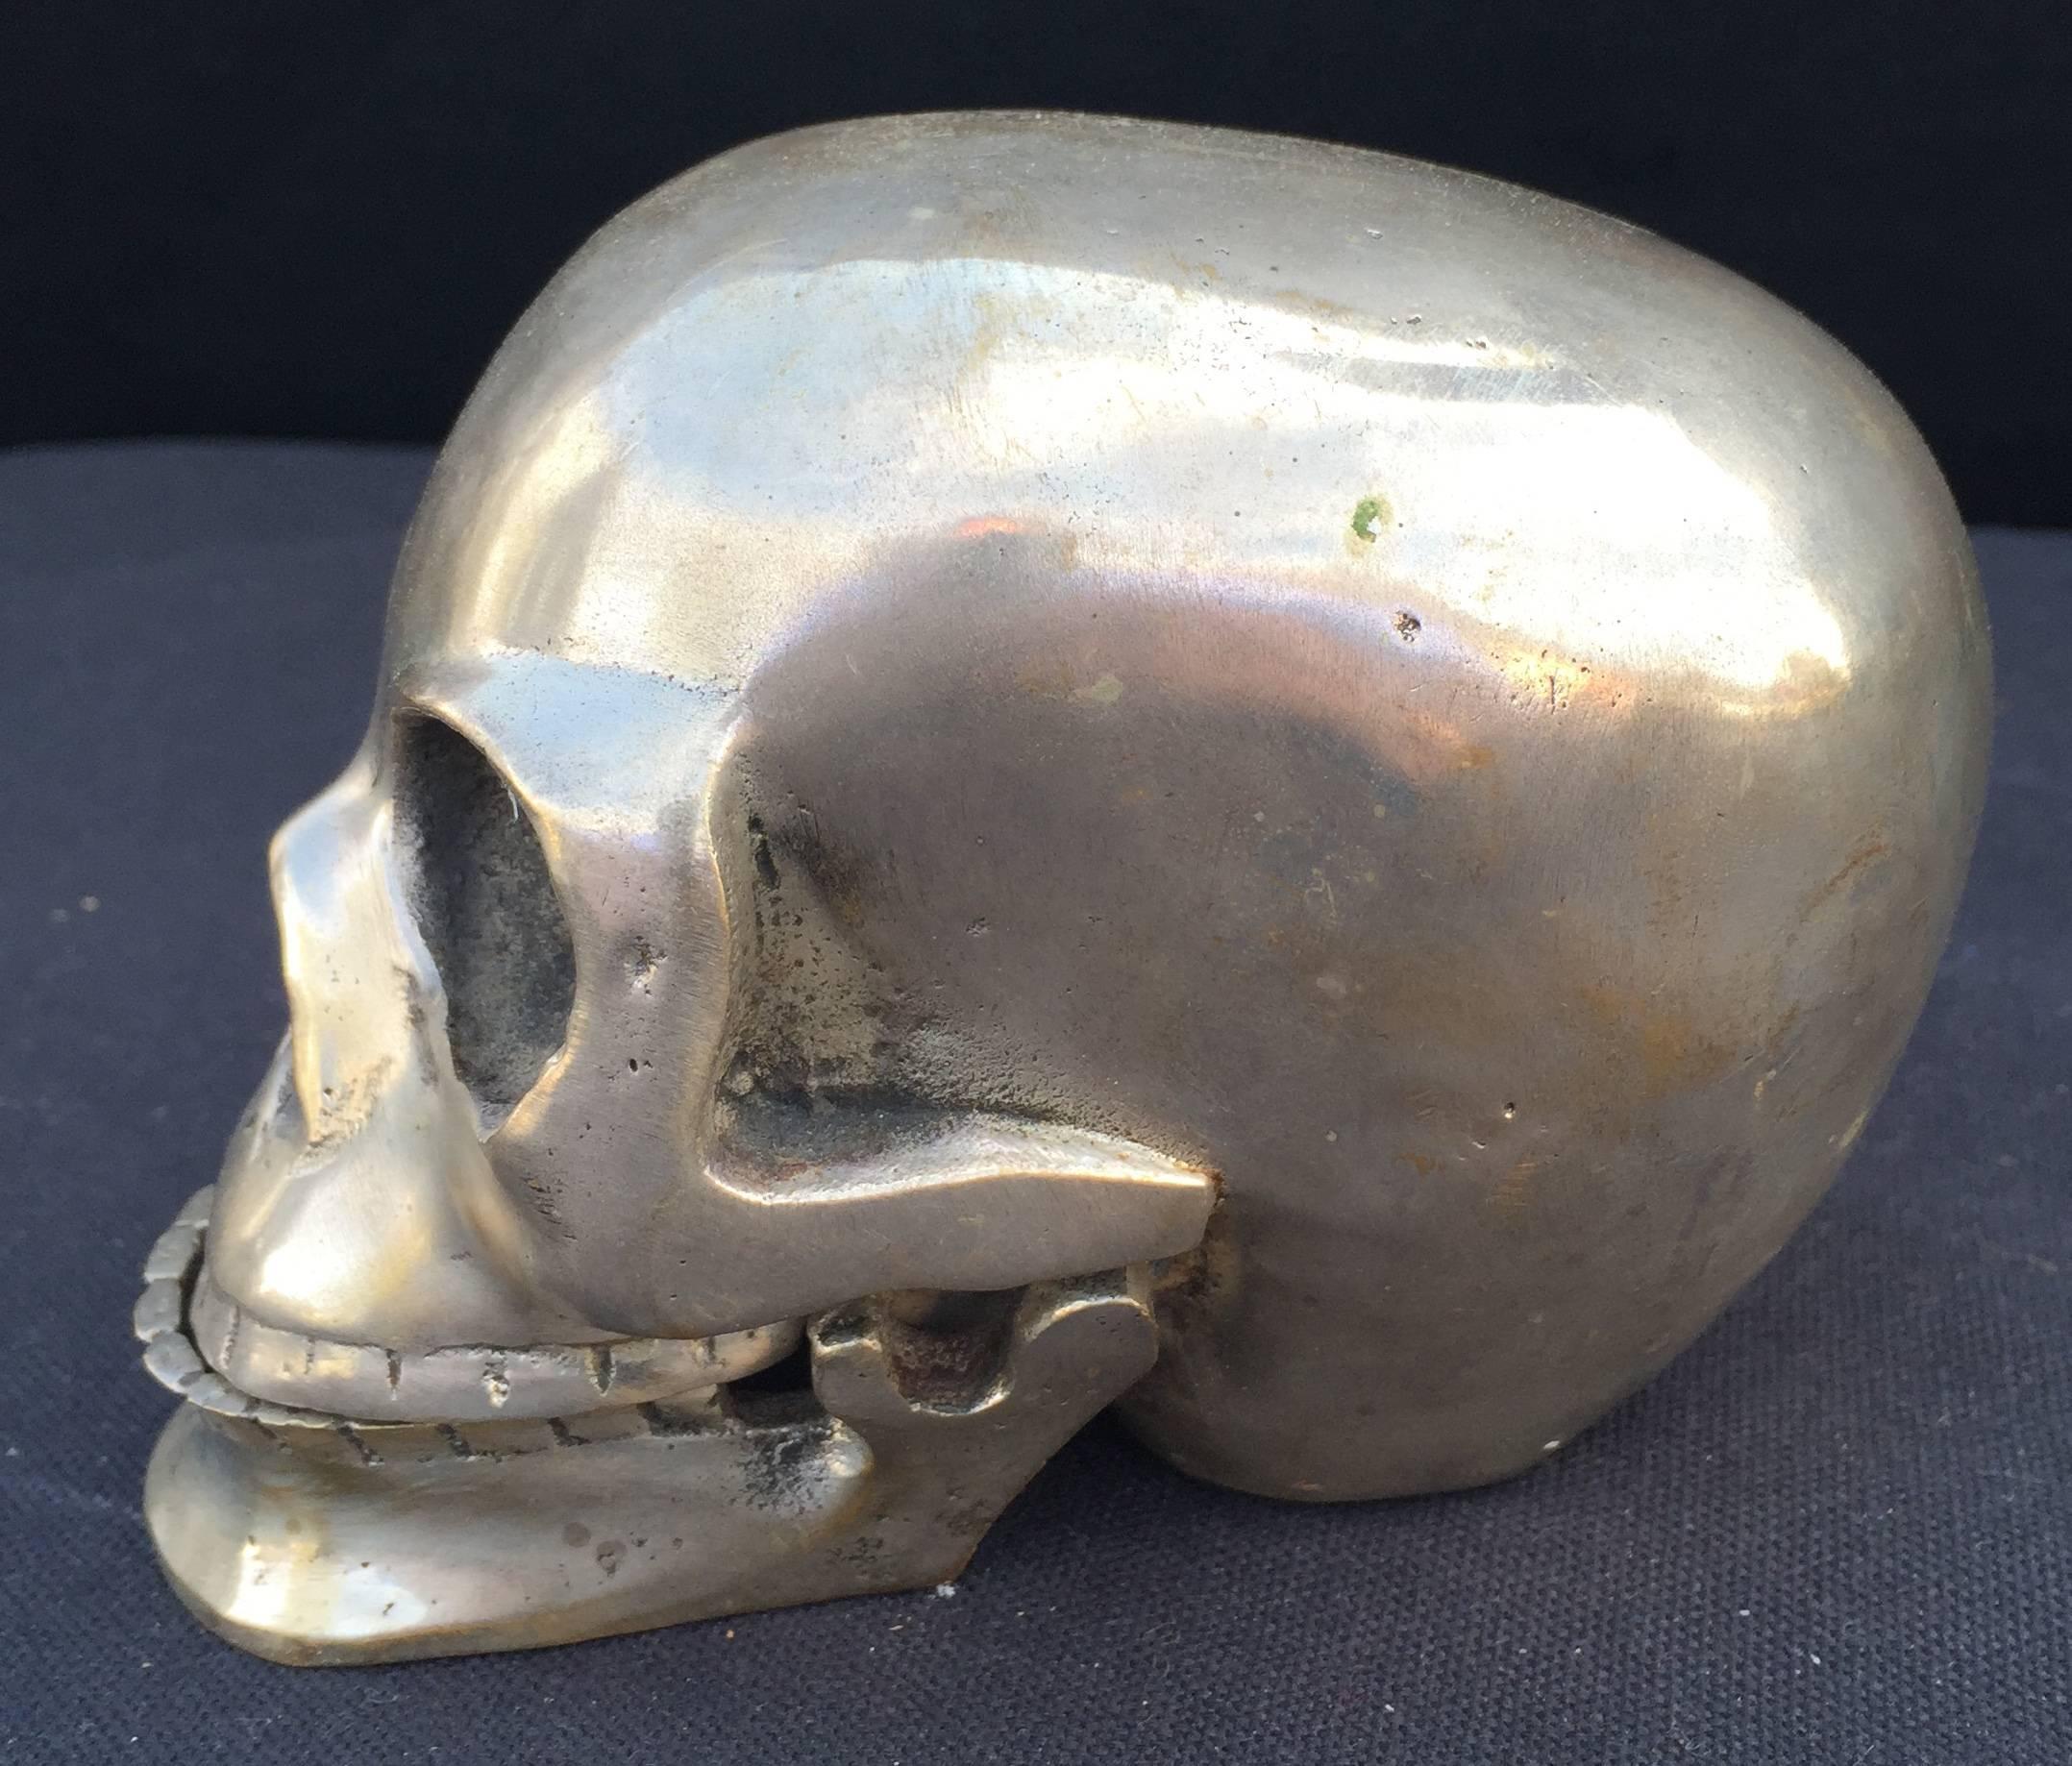 Nickel over brass skull sculpture with hinged mandible. Good weight.